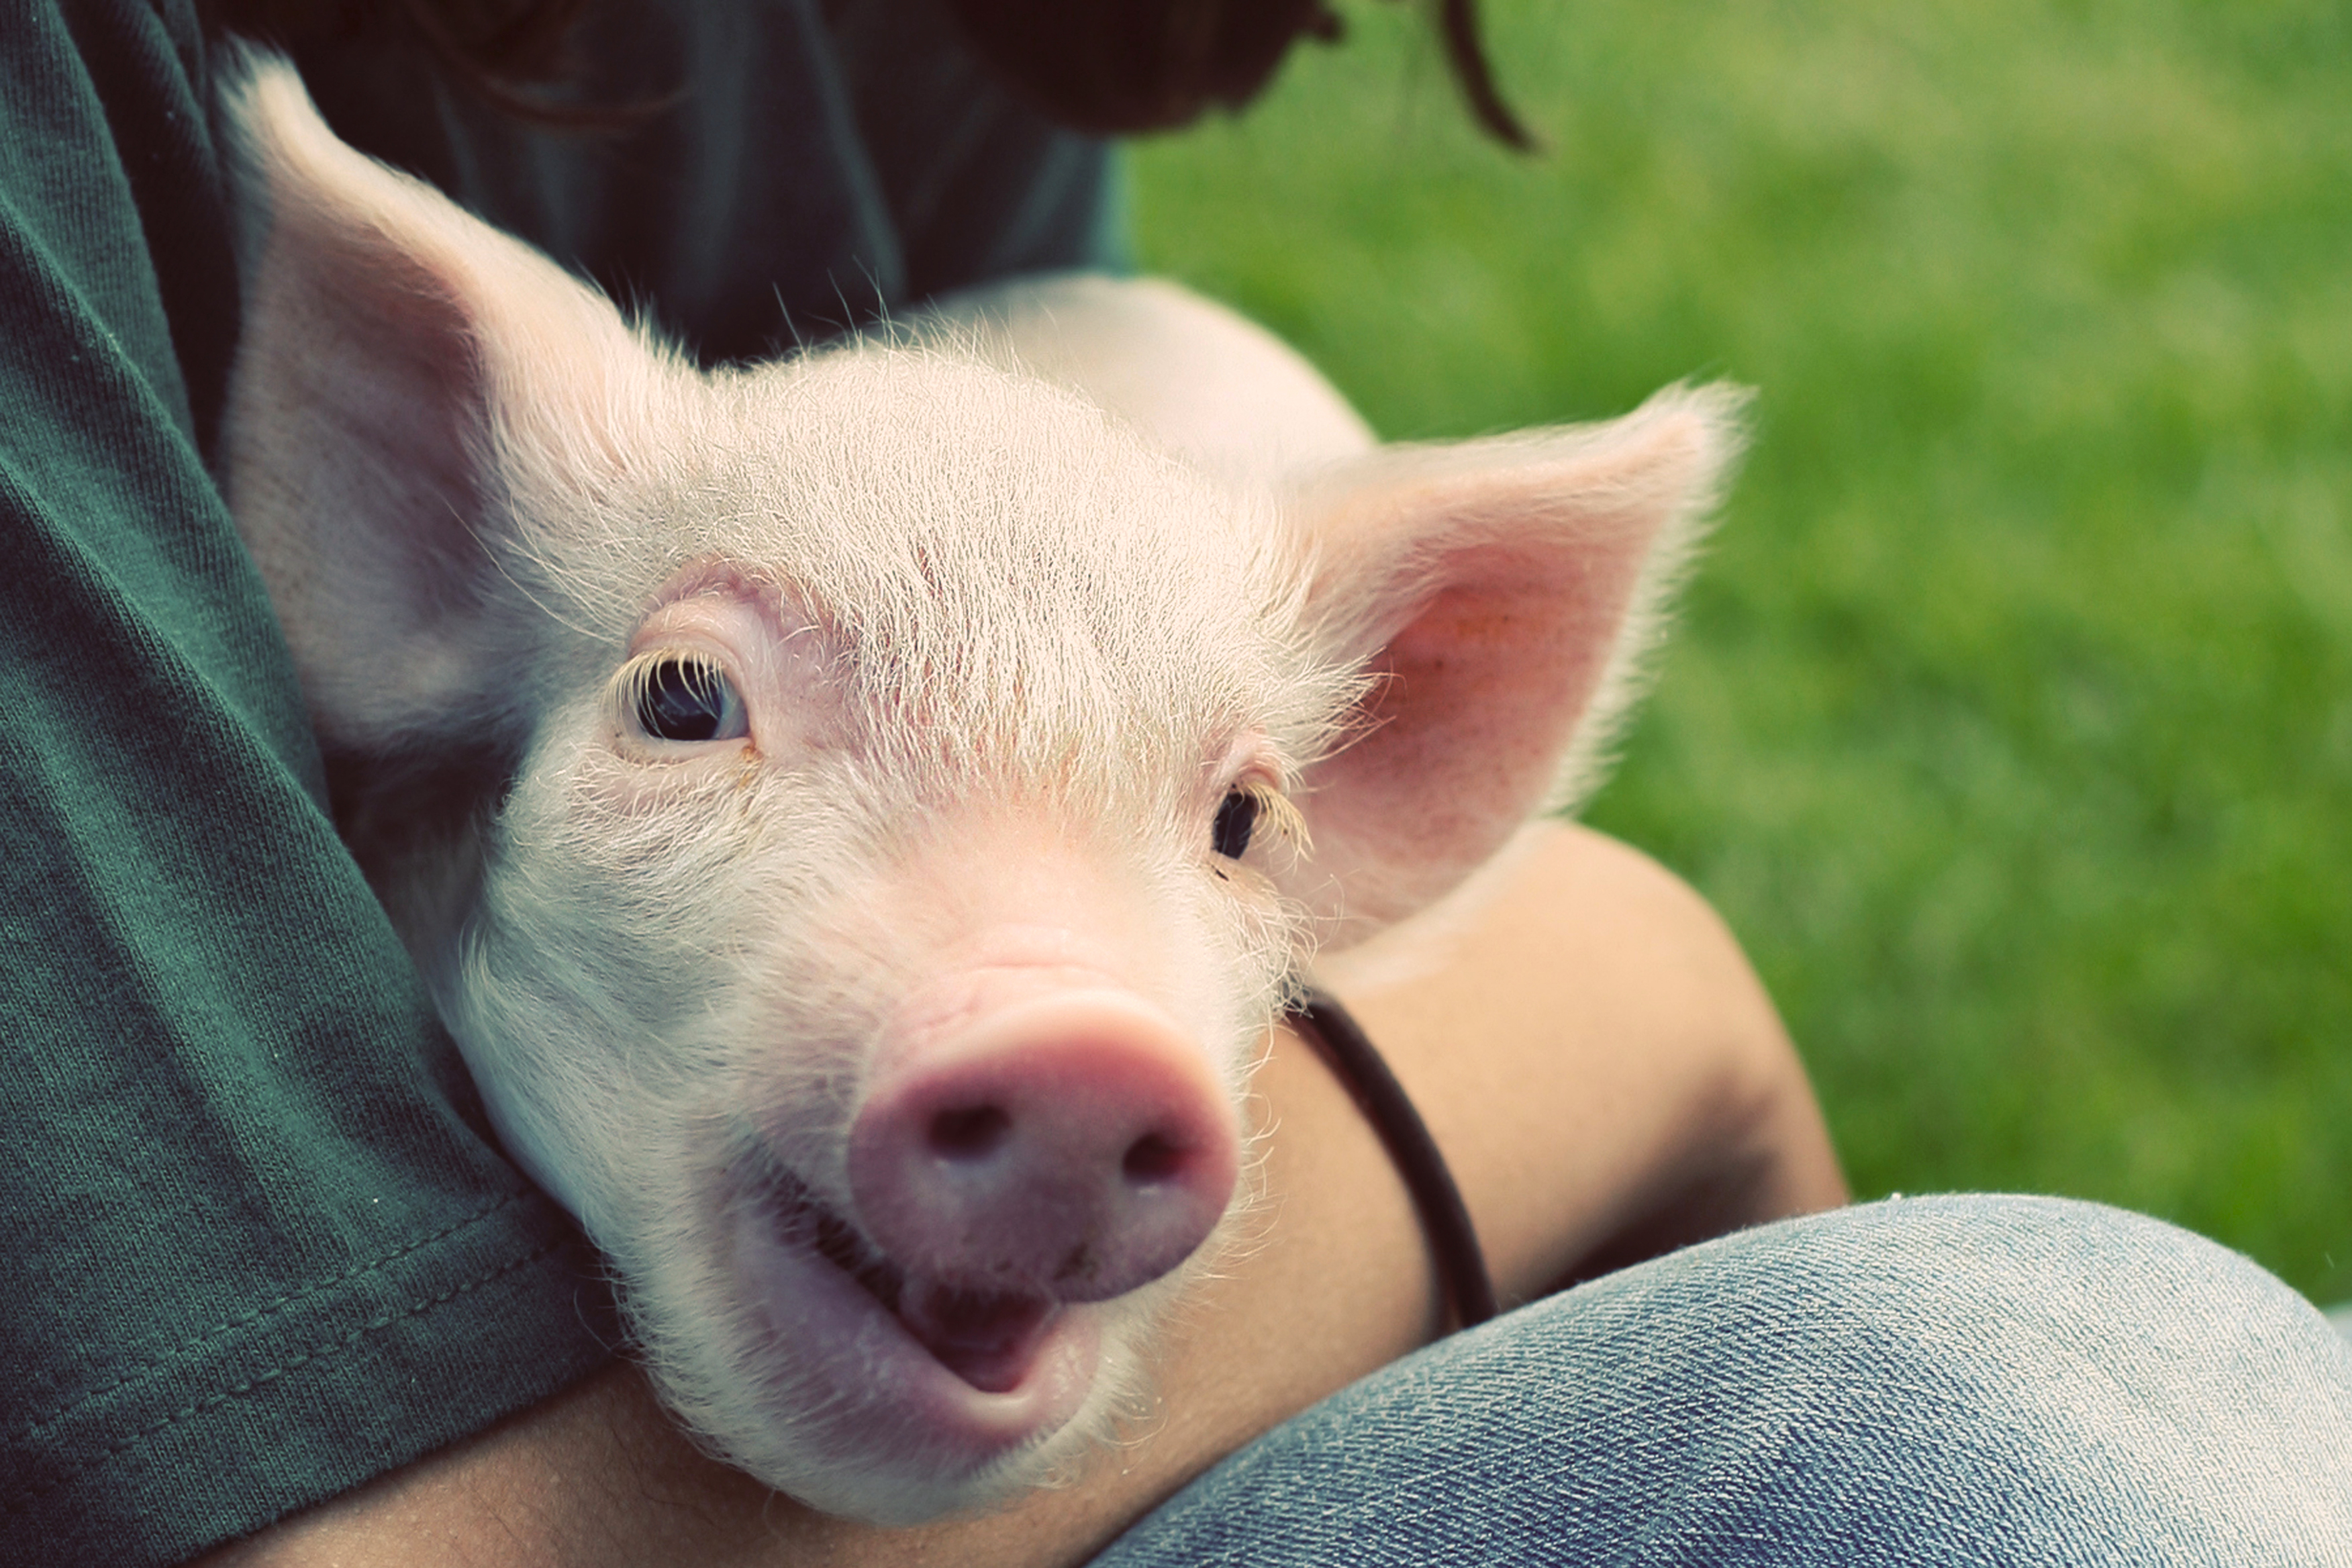 A person holding a piglet.